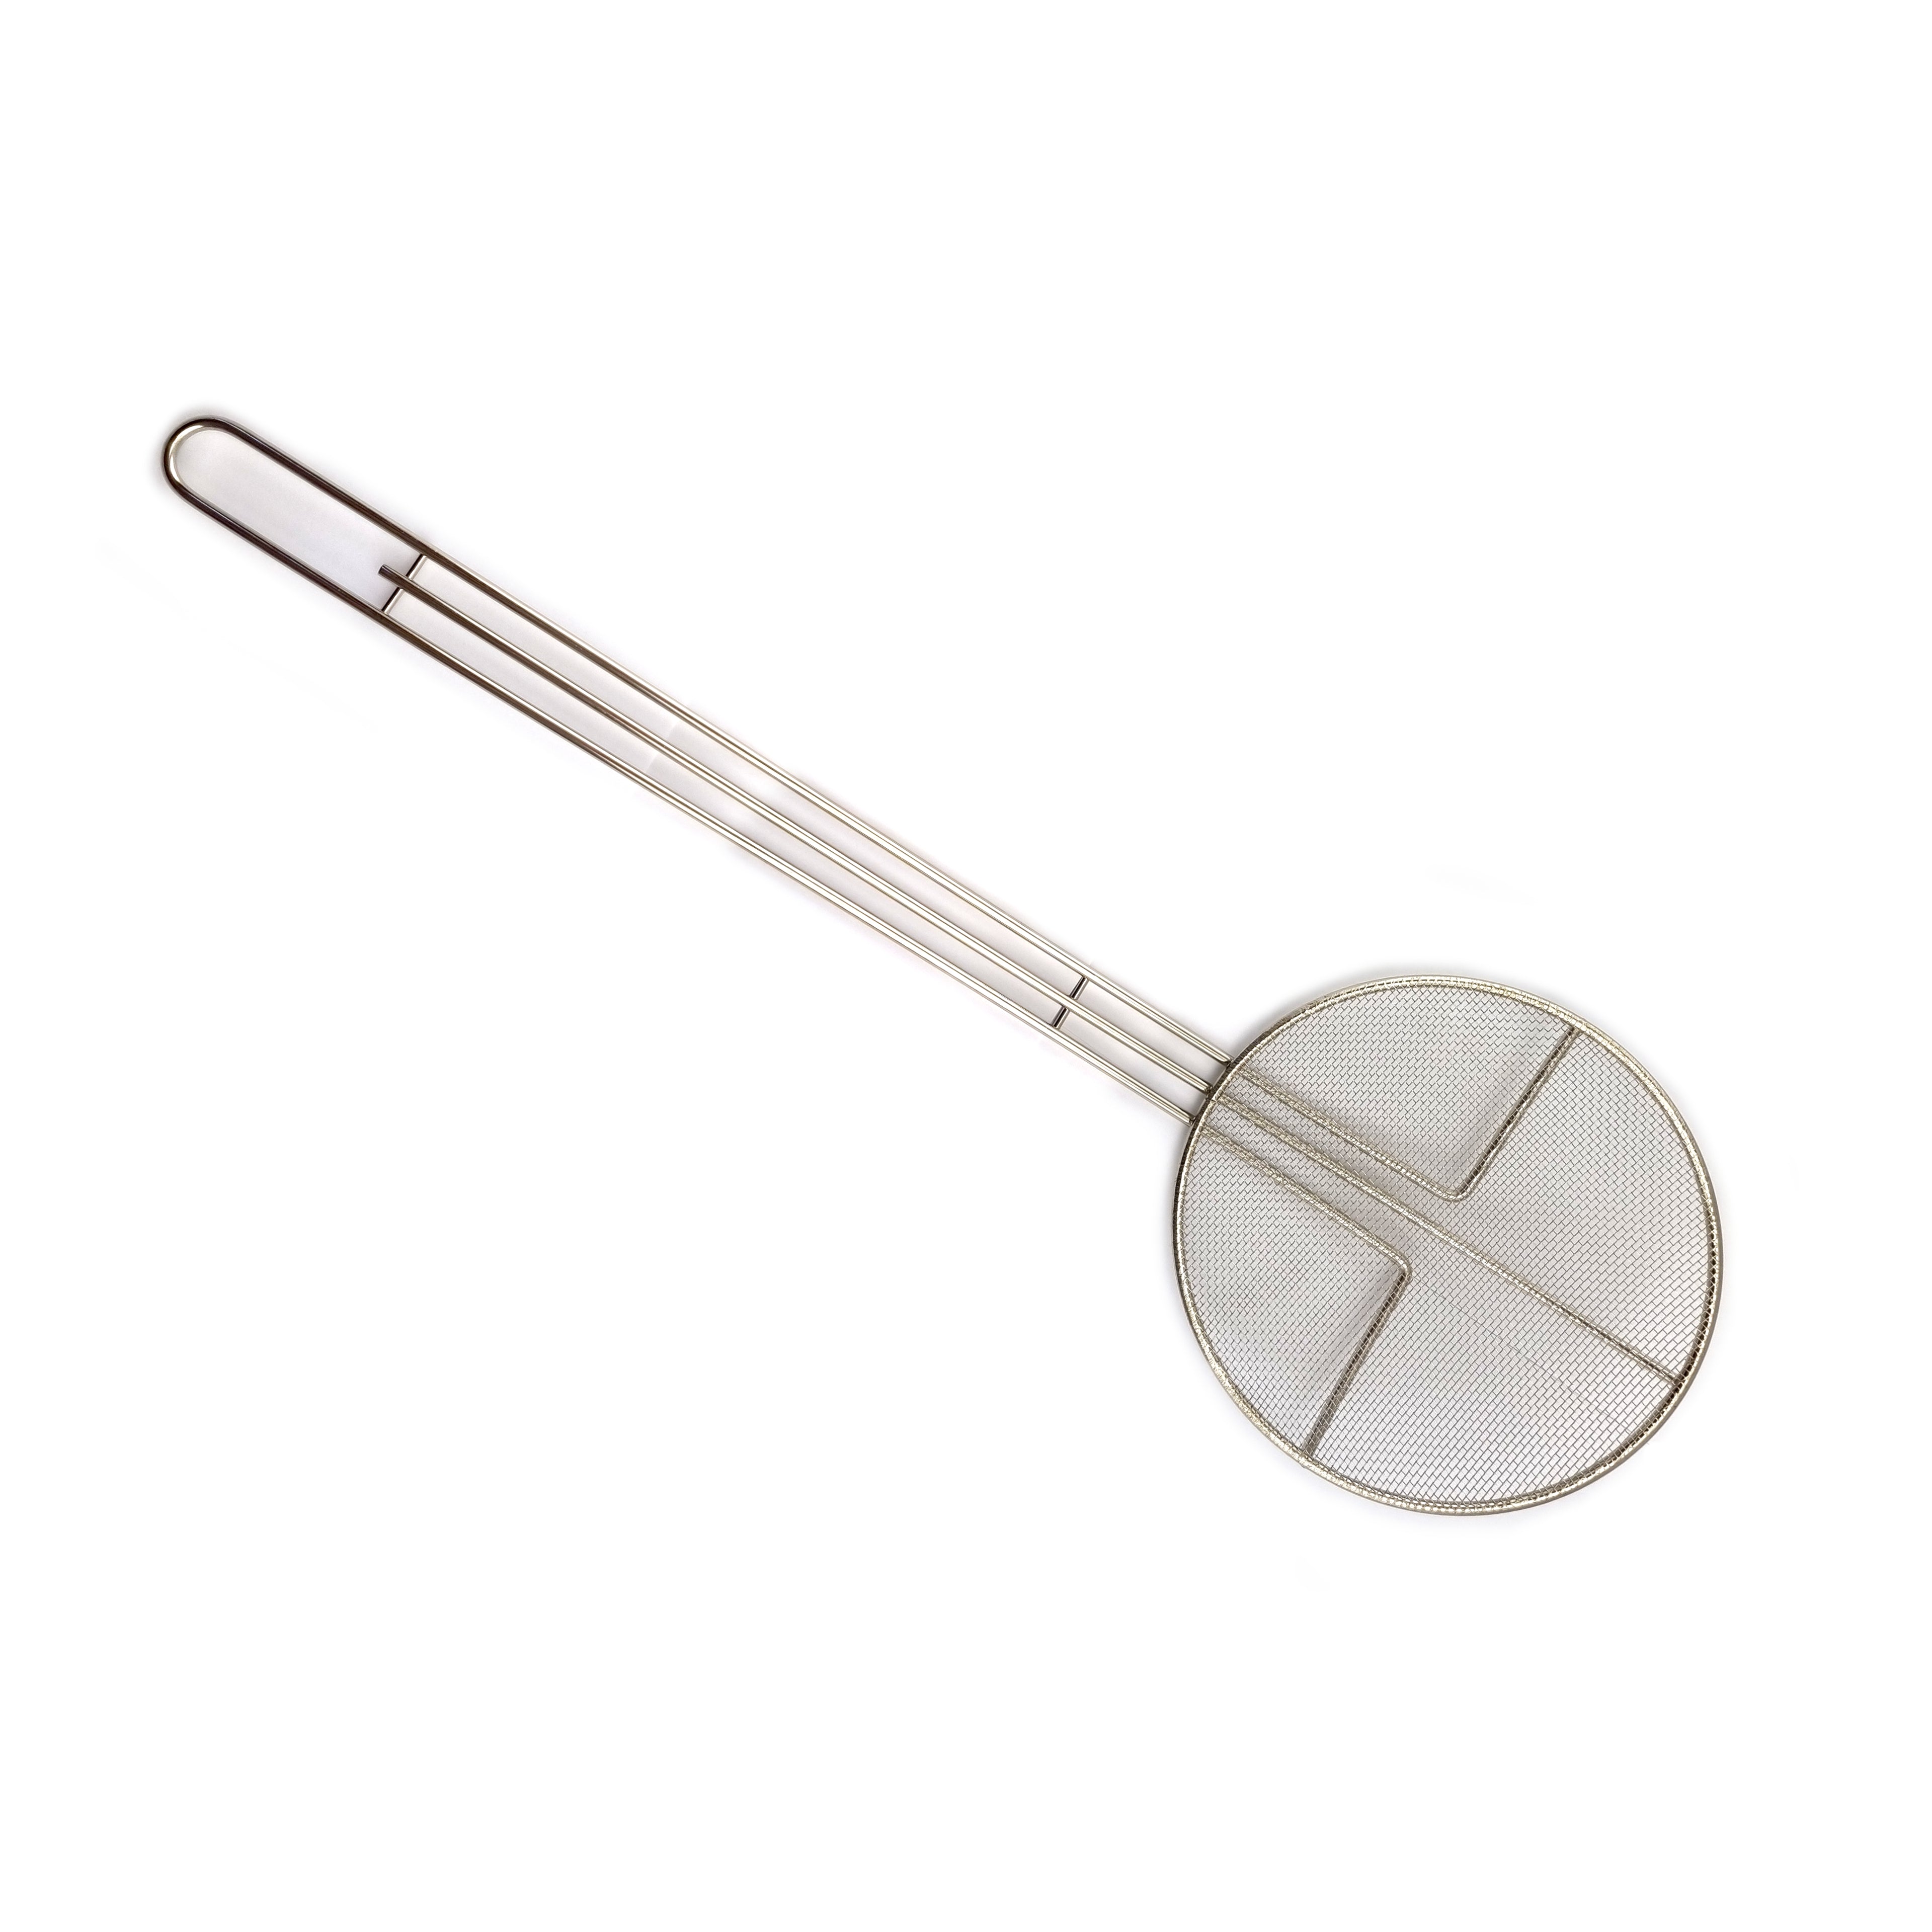 Modern style round scoop in nickel, 180mm diameter with a 400mm handle